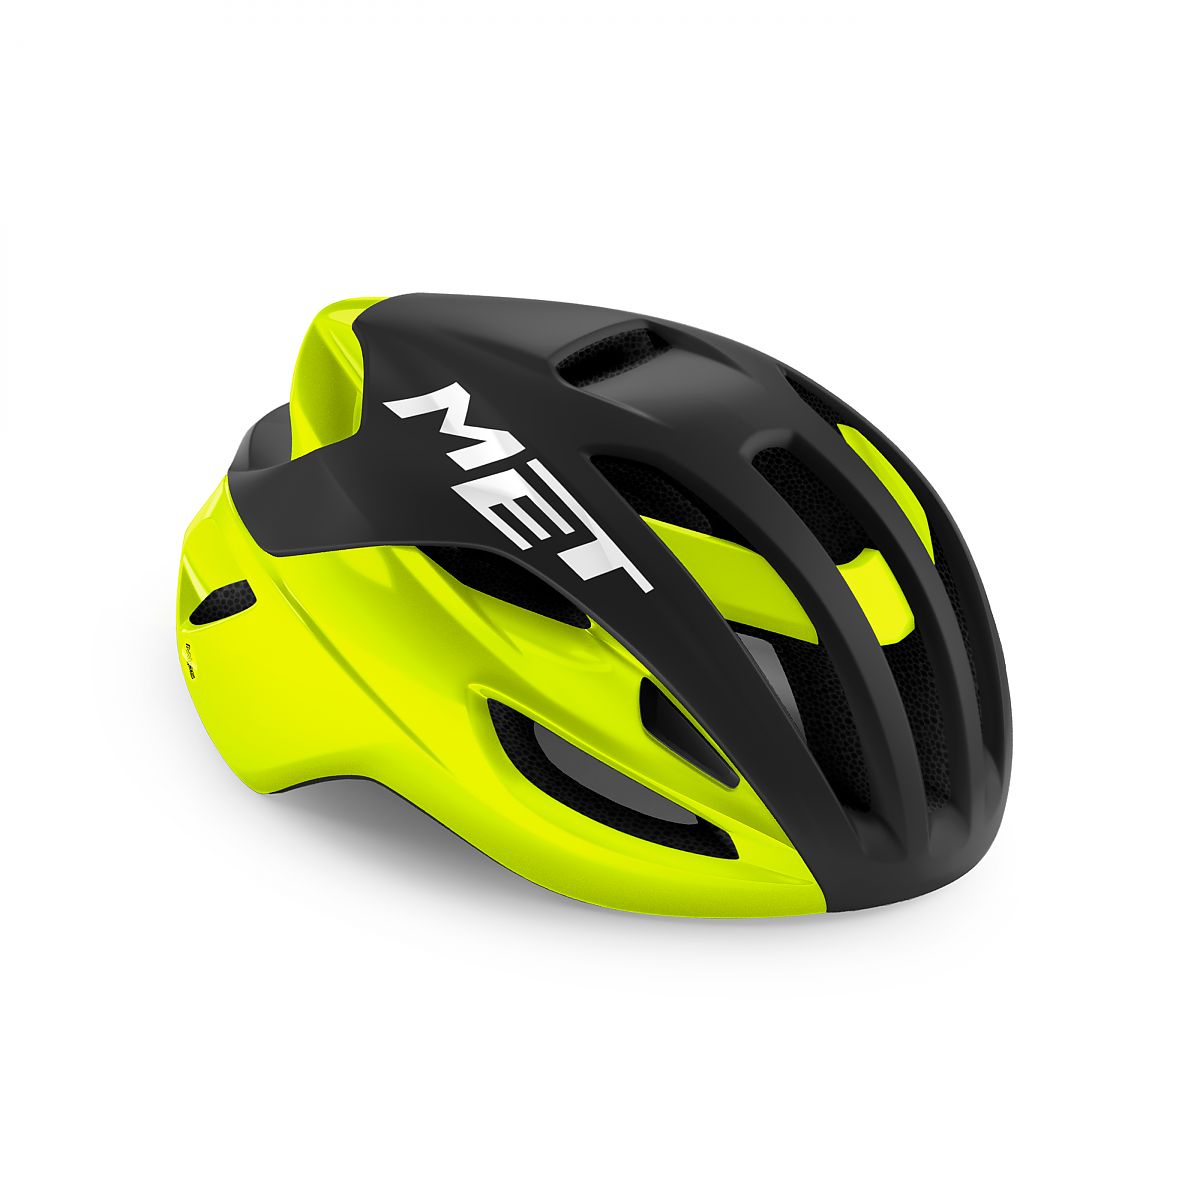 MET releases new Rivale MIPS at $180 | Bicycle Retailer and Industry News